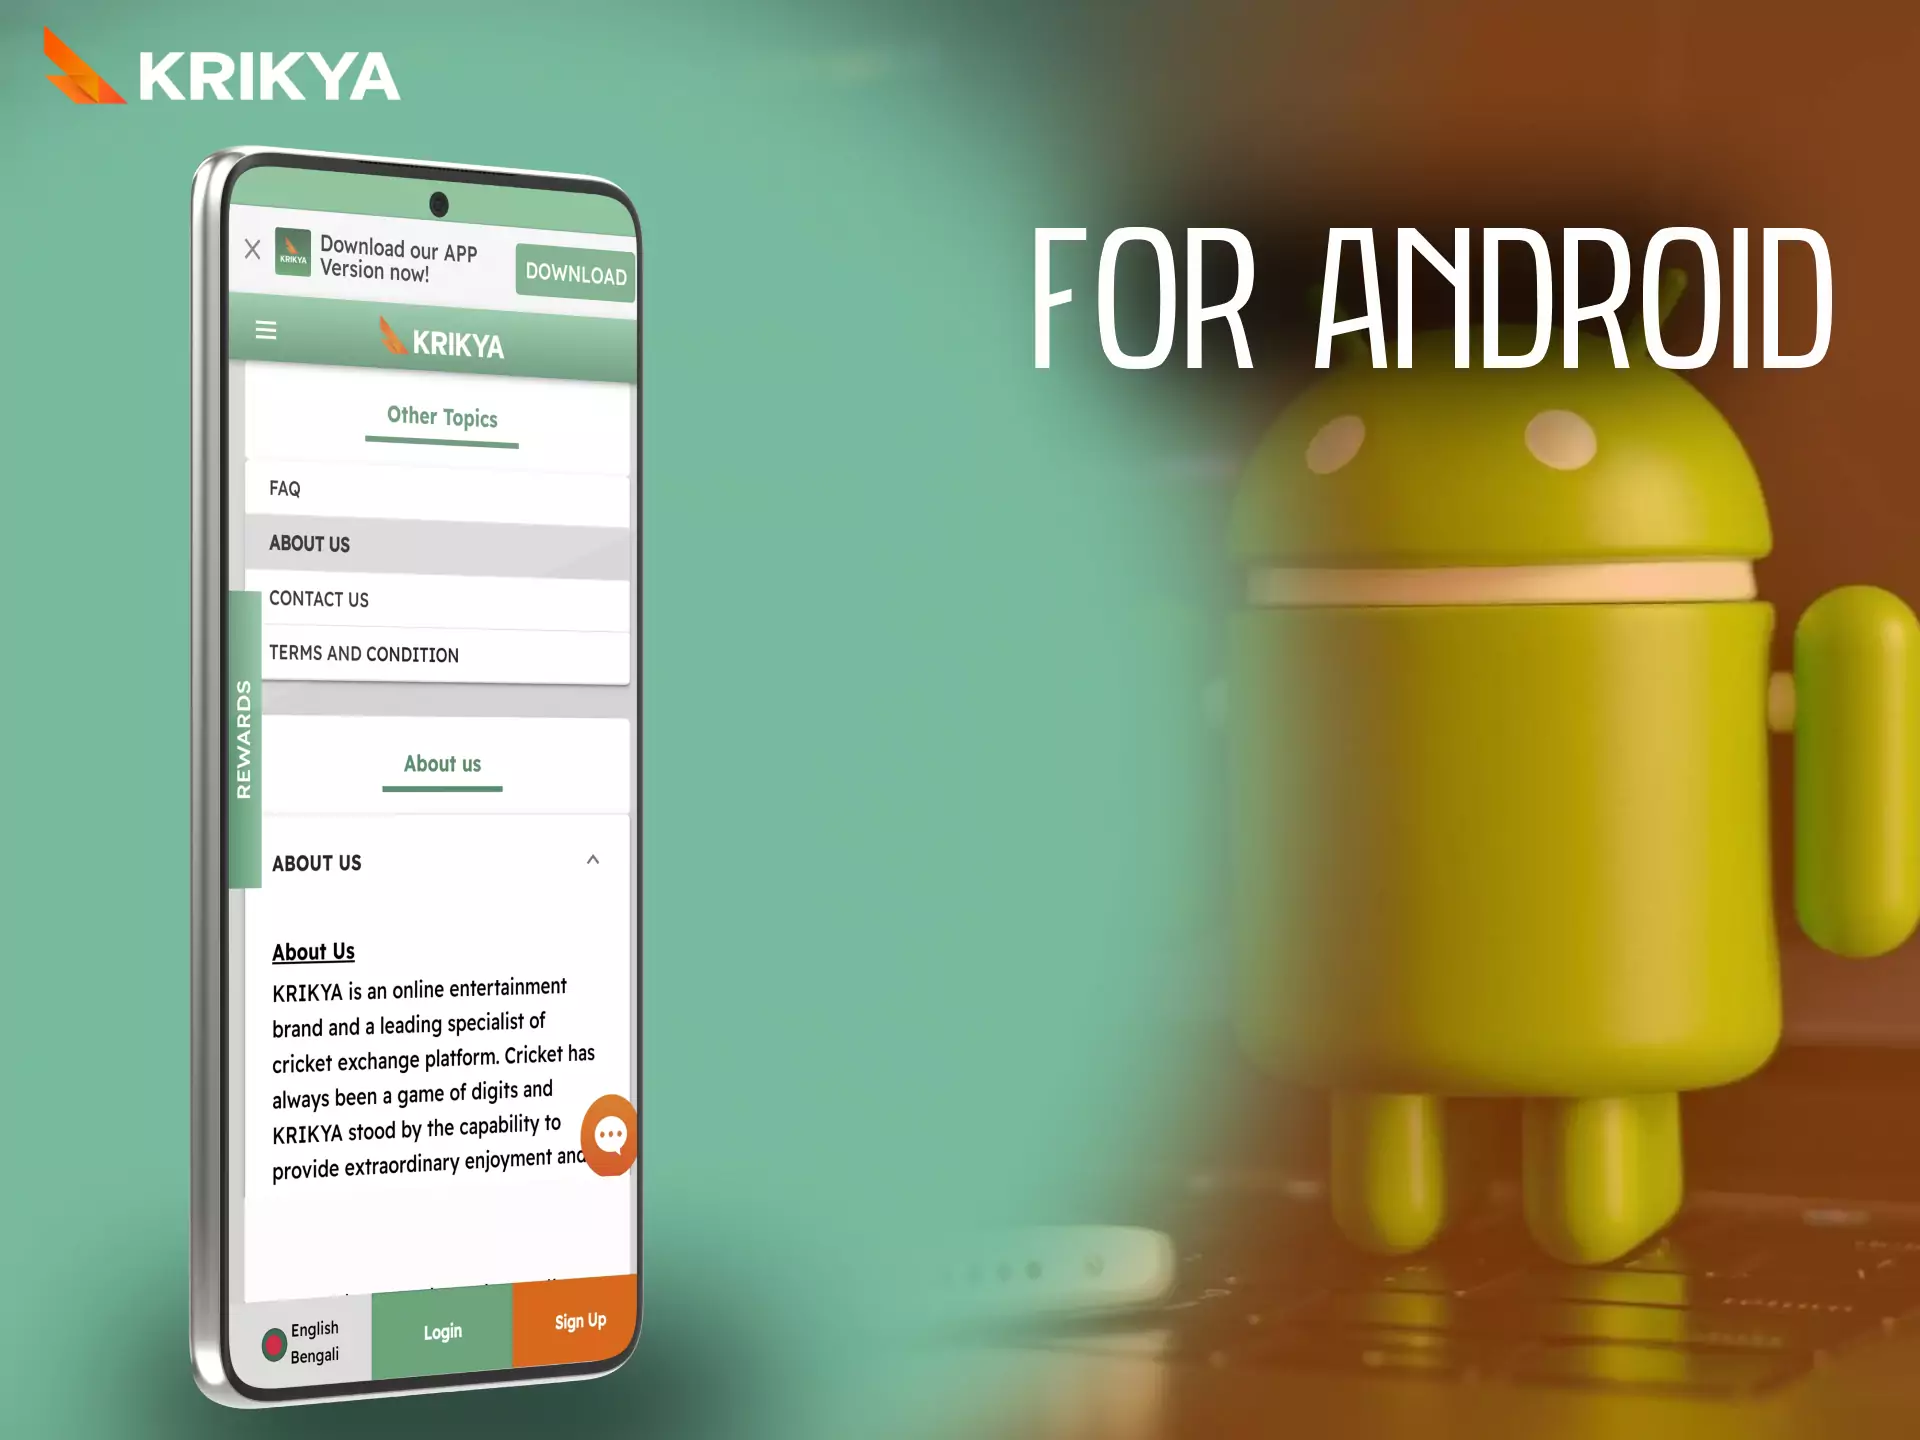 The Krikya application ican be installed on Android devices.